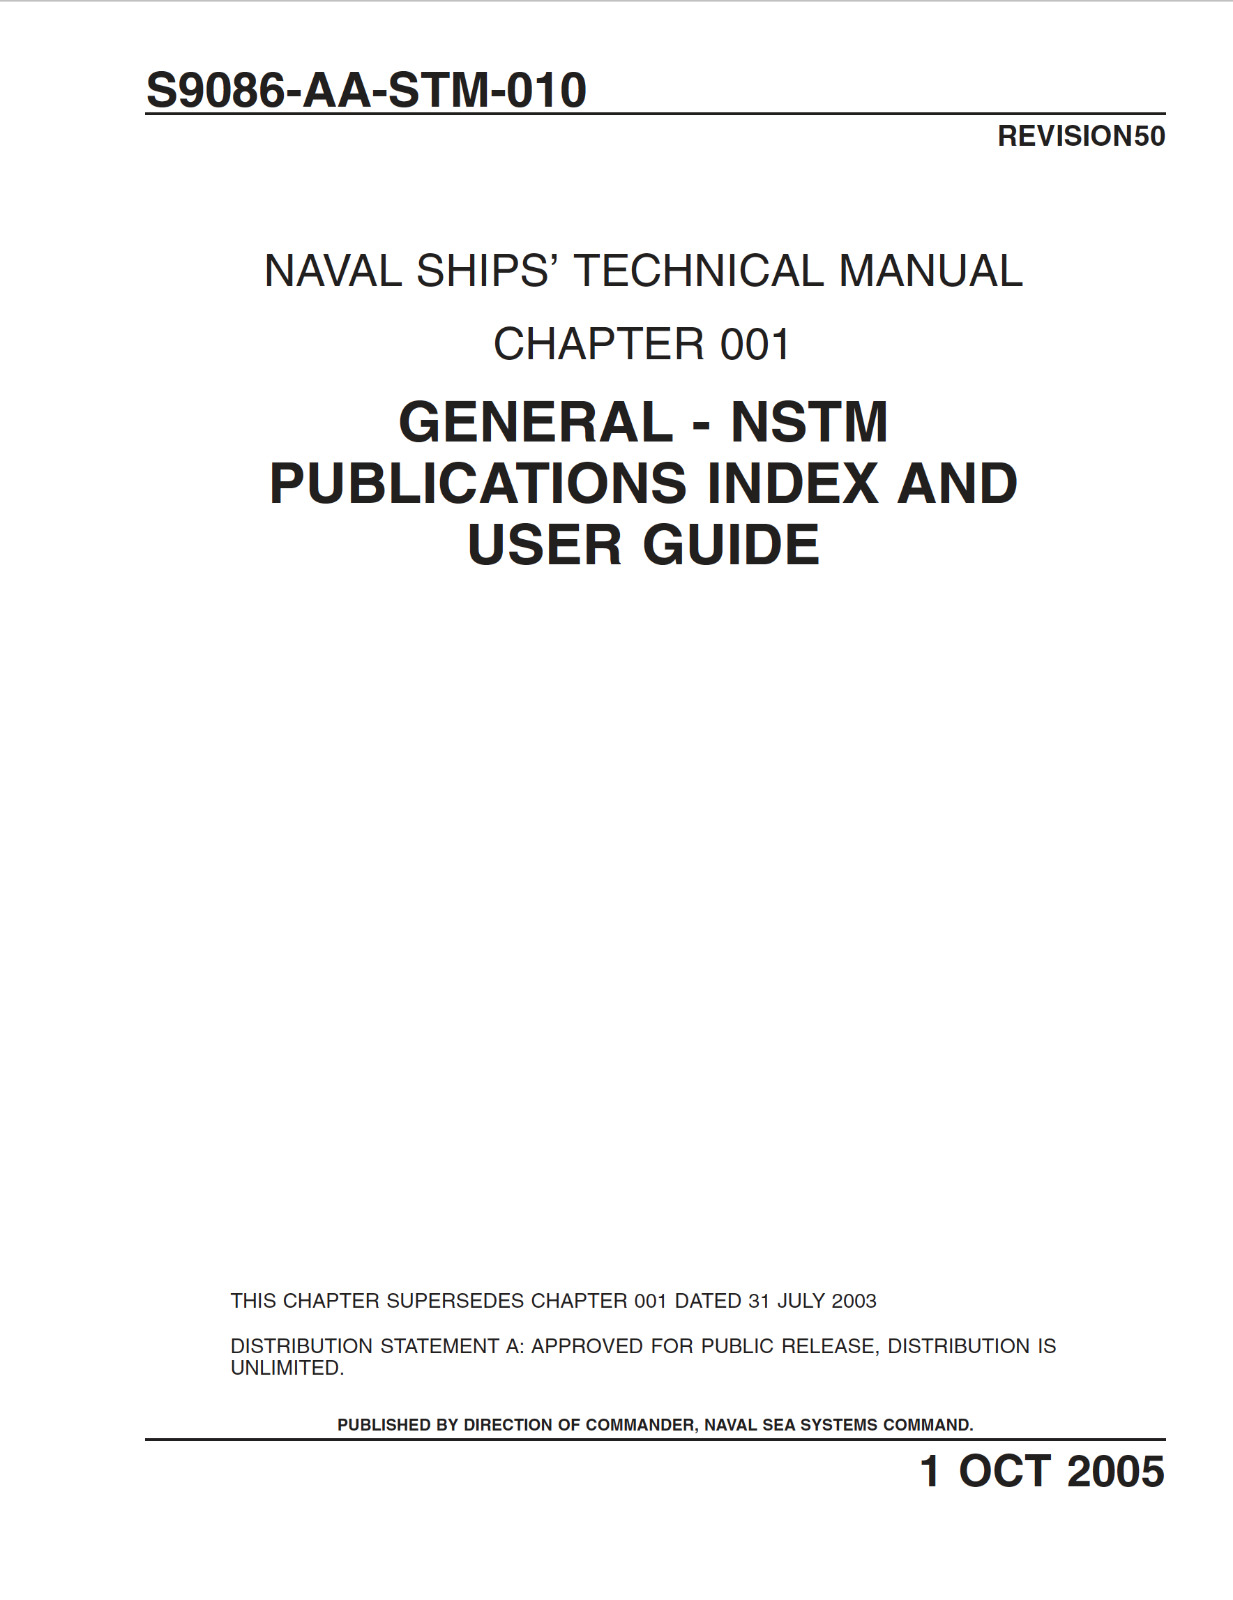 1,546 Page Naval Ships\' Technical Manual (NSTM) Publications on Data CD